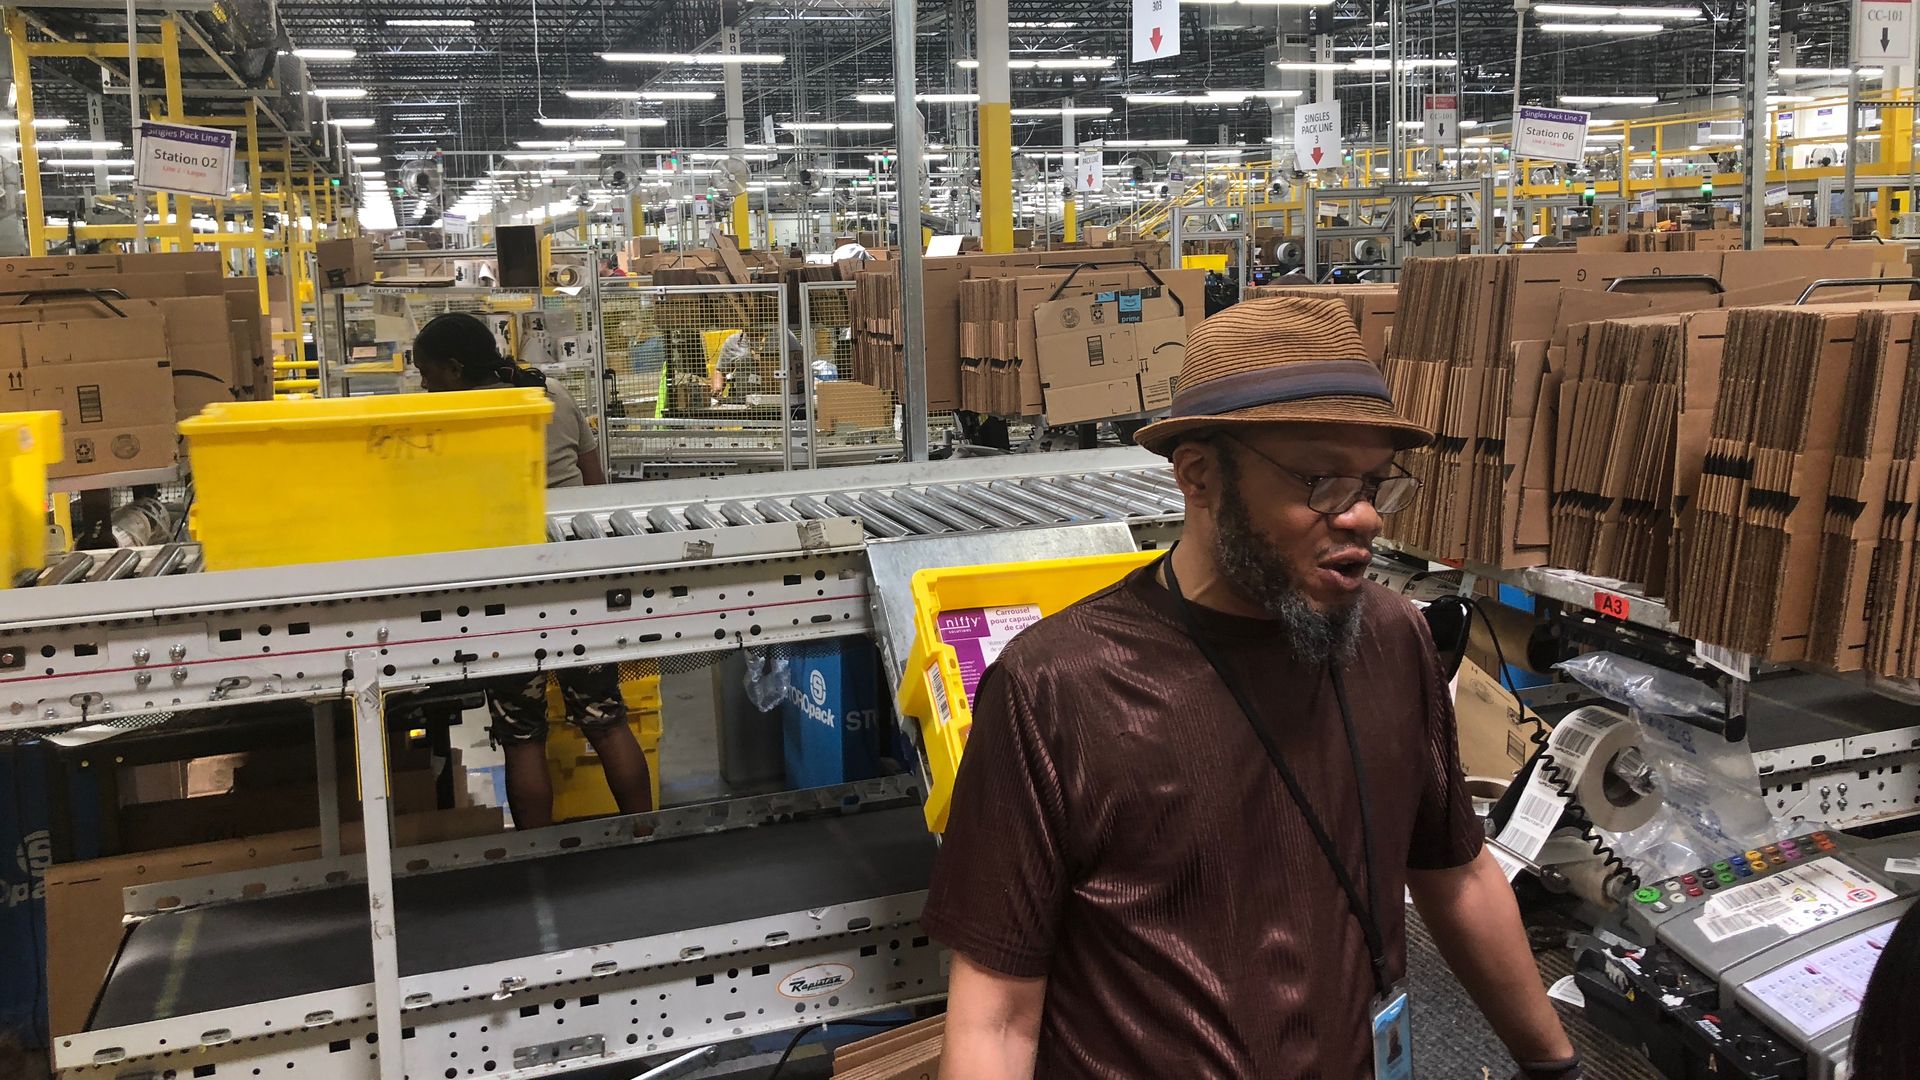 A man stands next to a conveyer belt with Amazon packages on it